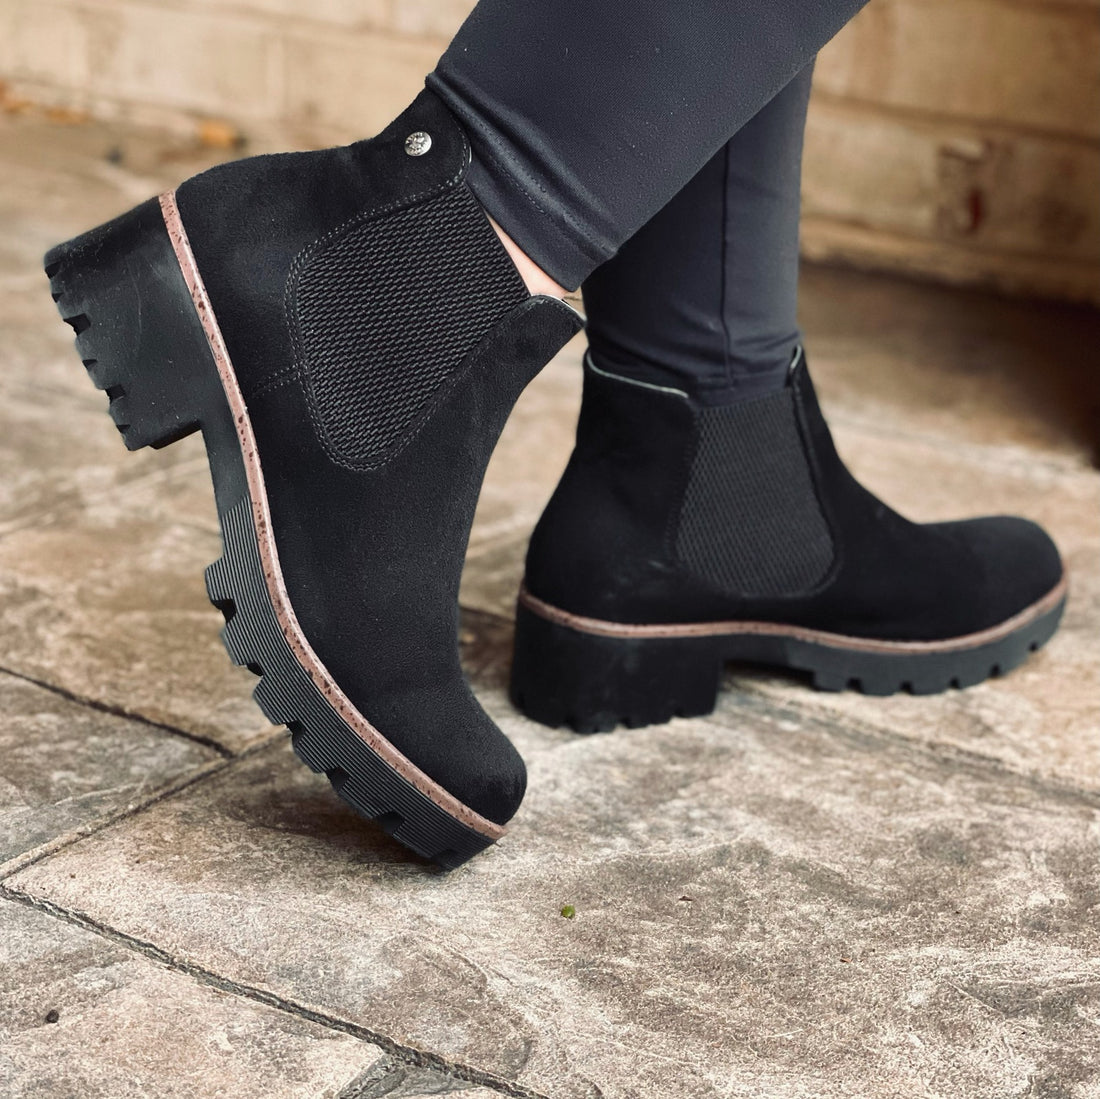 Employee Favorite Shoes and Boots for Fall 2021, plum-bottom